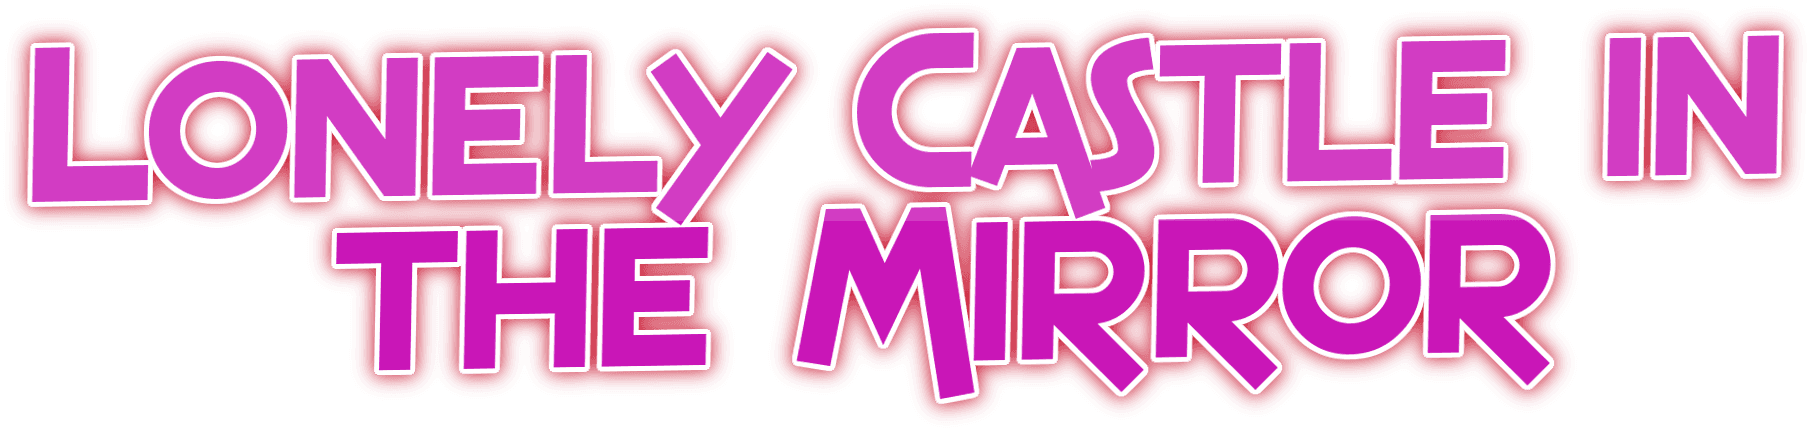 Lonely Castle in the Mirror logo